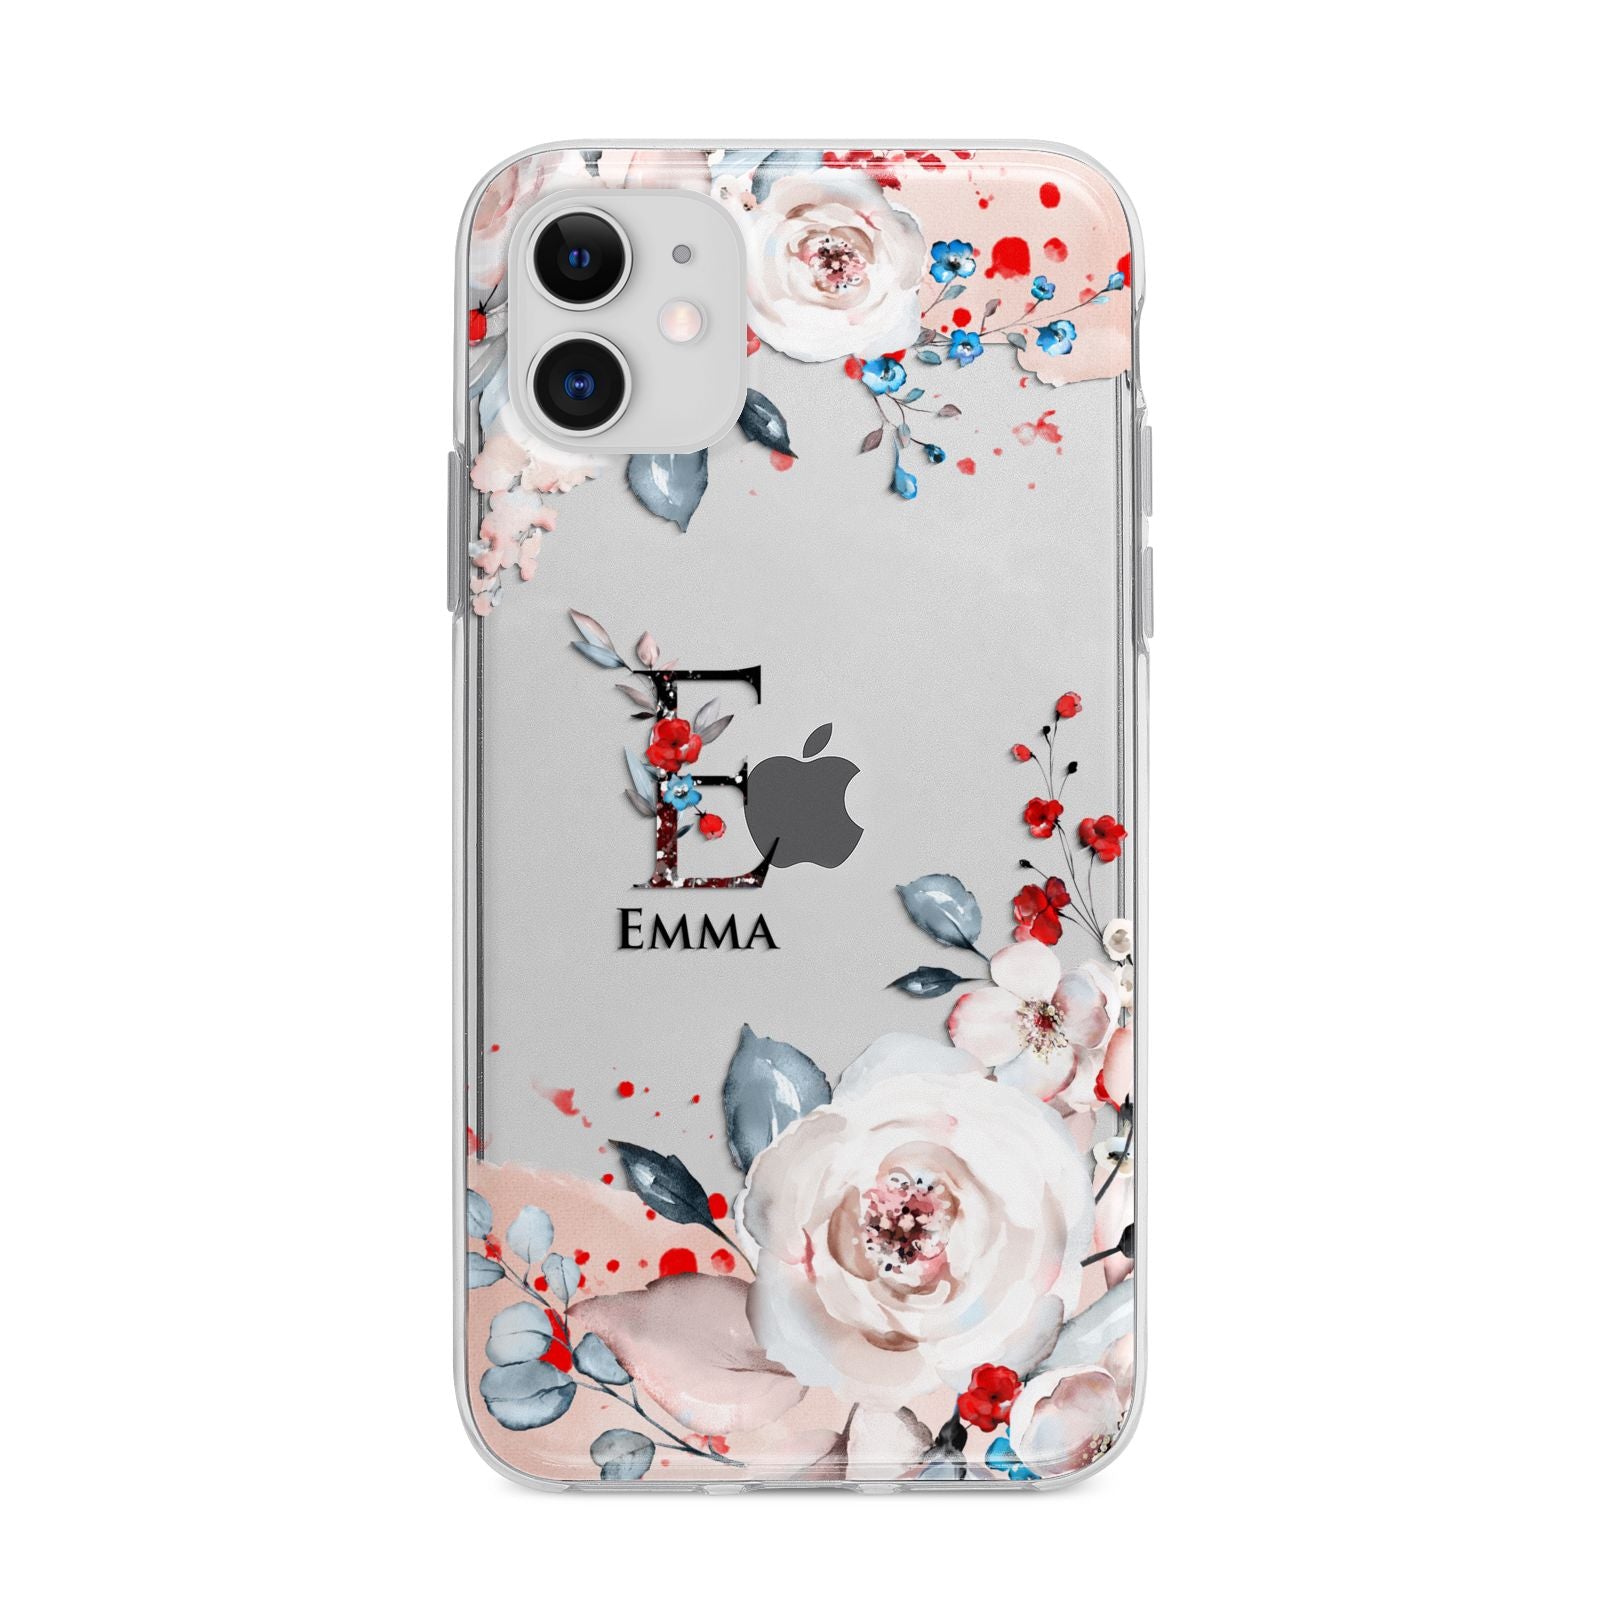 Monogrammed Roses Floral Wreath Apple iPhone 11 in White with Bumper Case